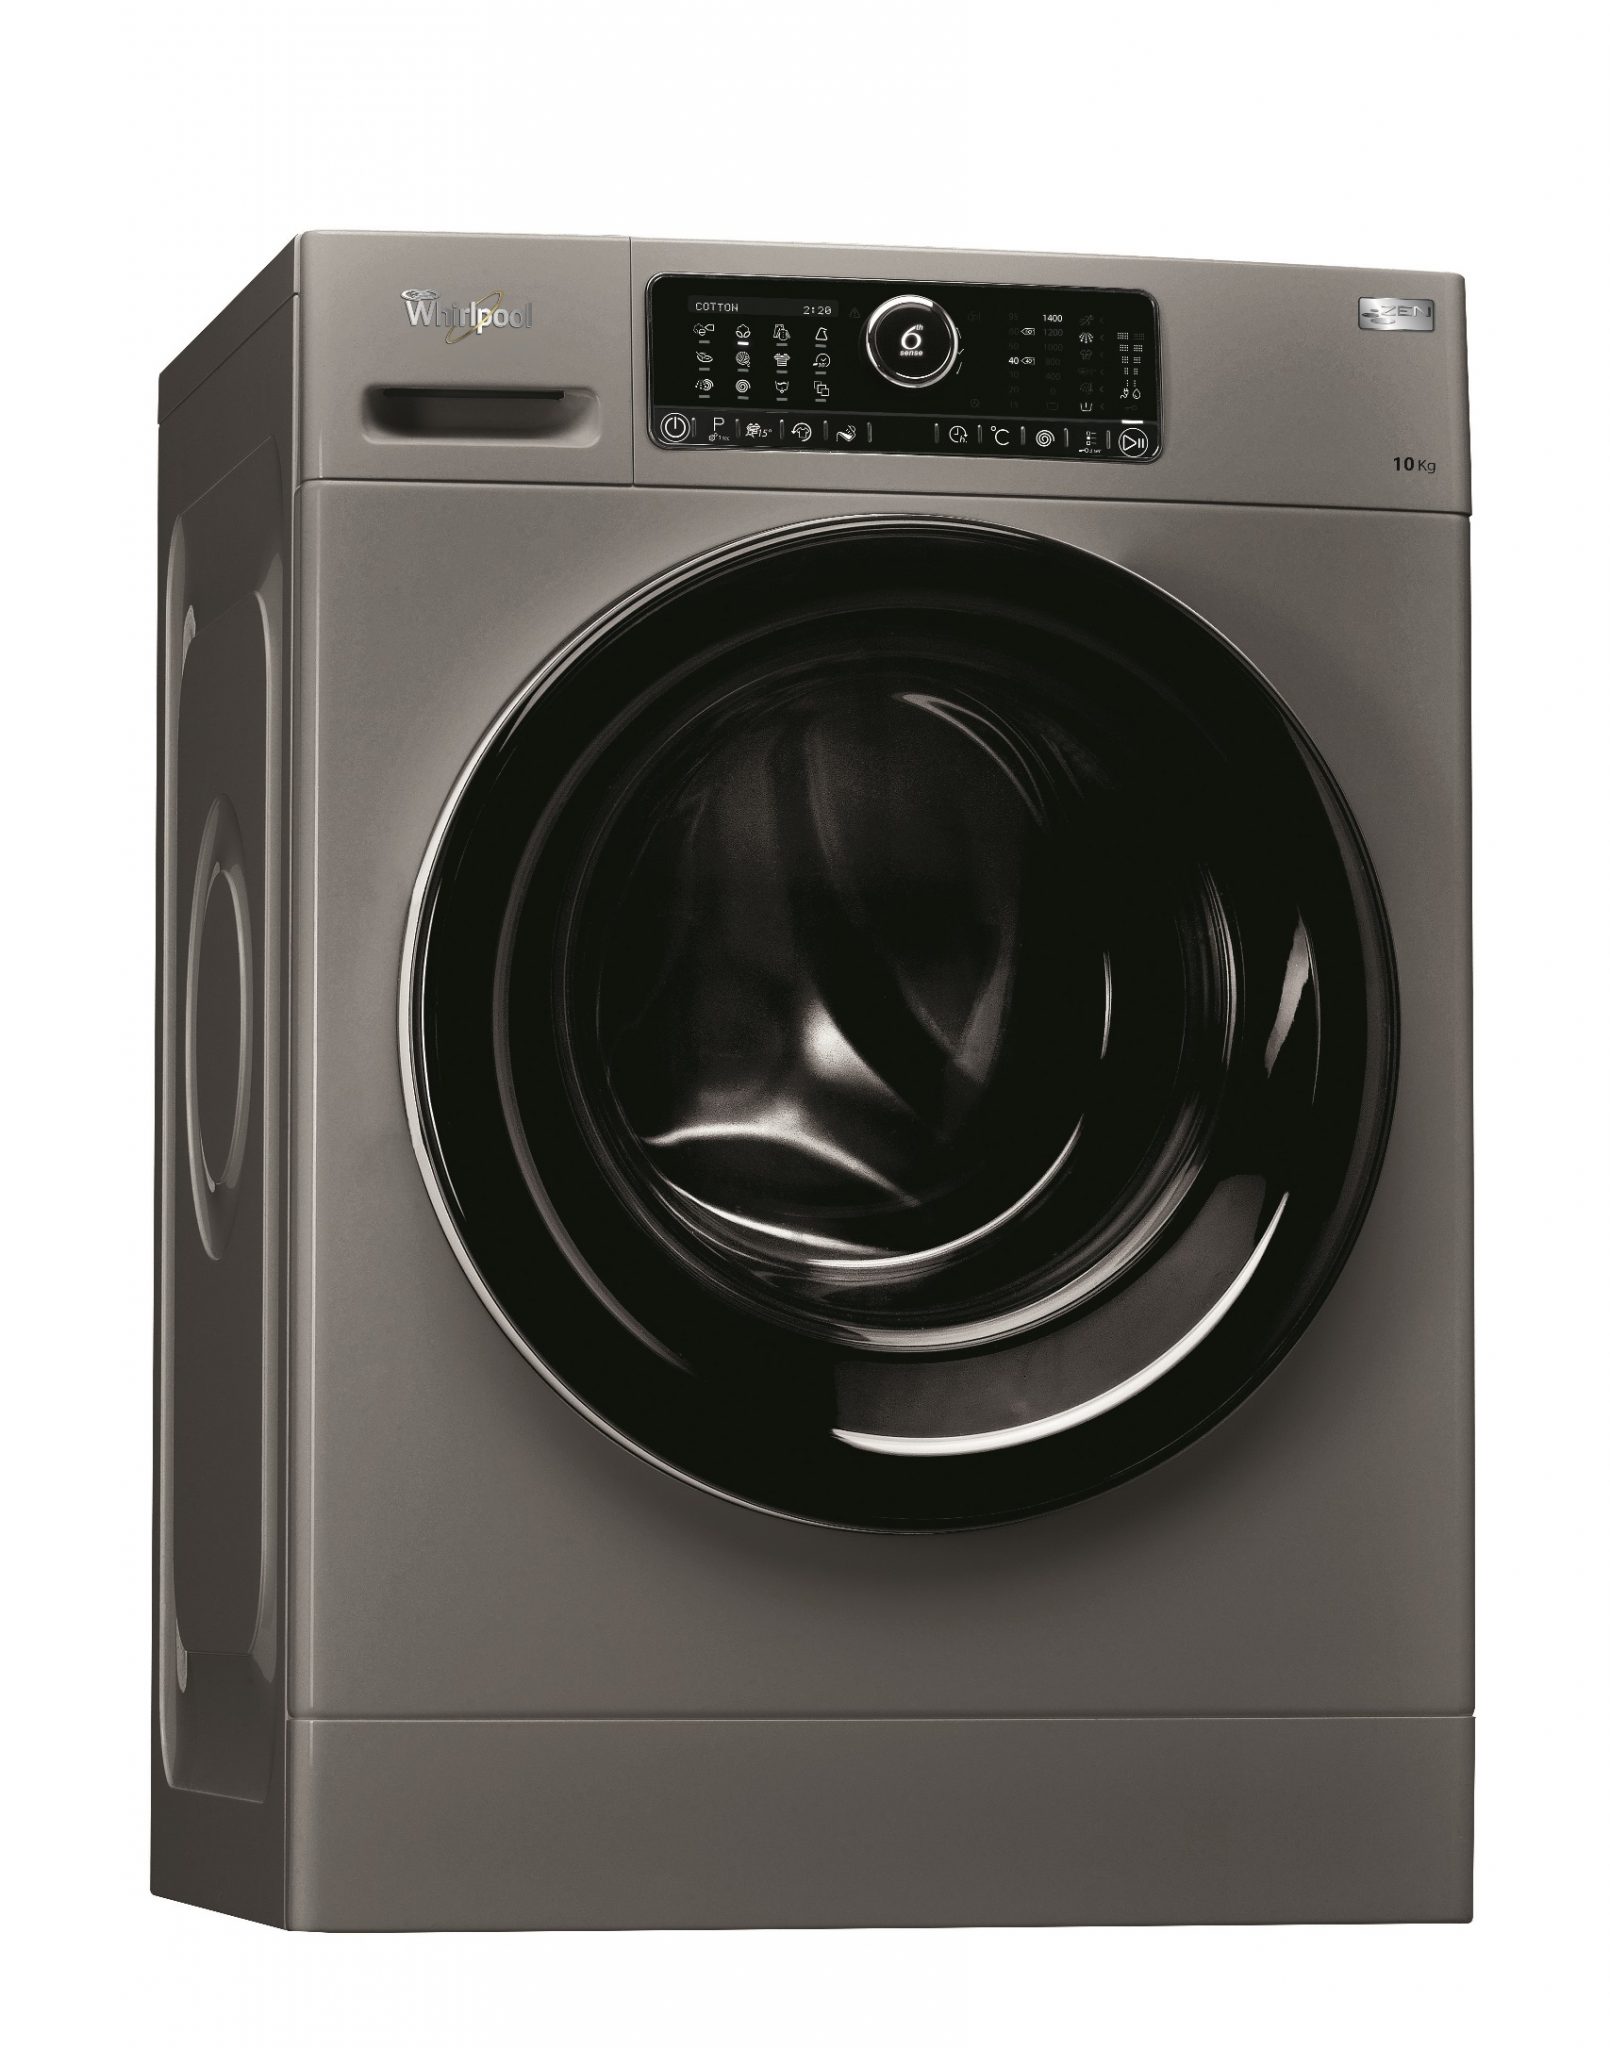 REDUCE ENERGY CONSUMPTION WITH WHIRLPOOL FOR BIG ENERGY SAVING WEEK @WhirlpoolCorp